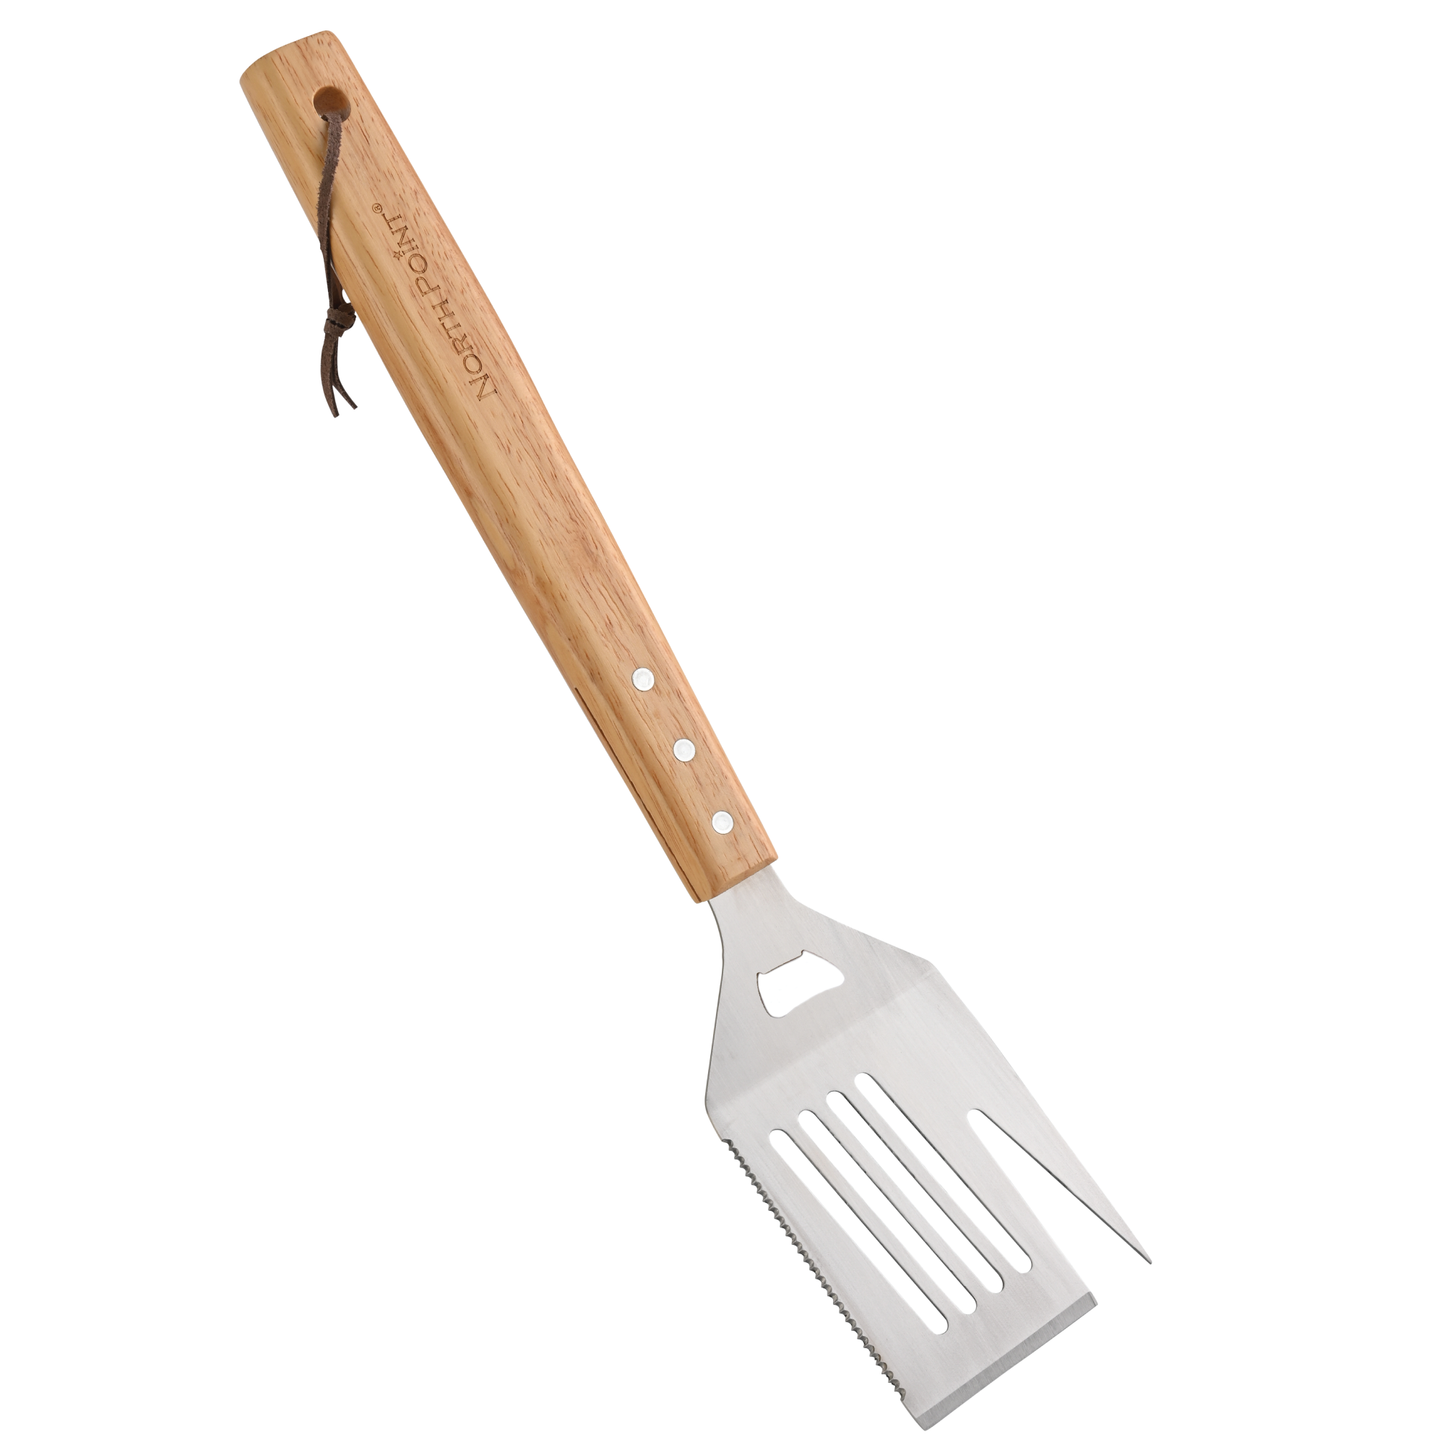 North Point® stainless steel 5-in-1 Spatula with wooden handle